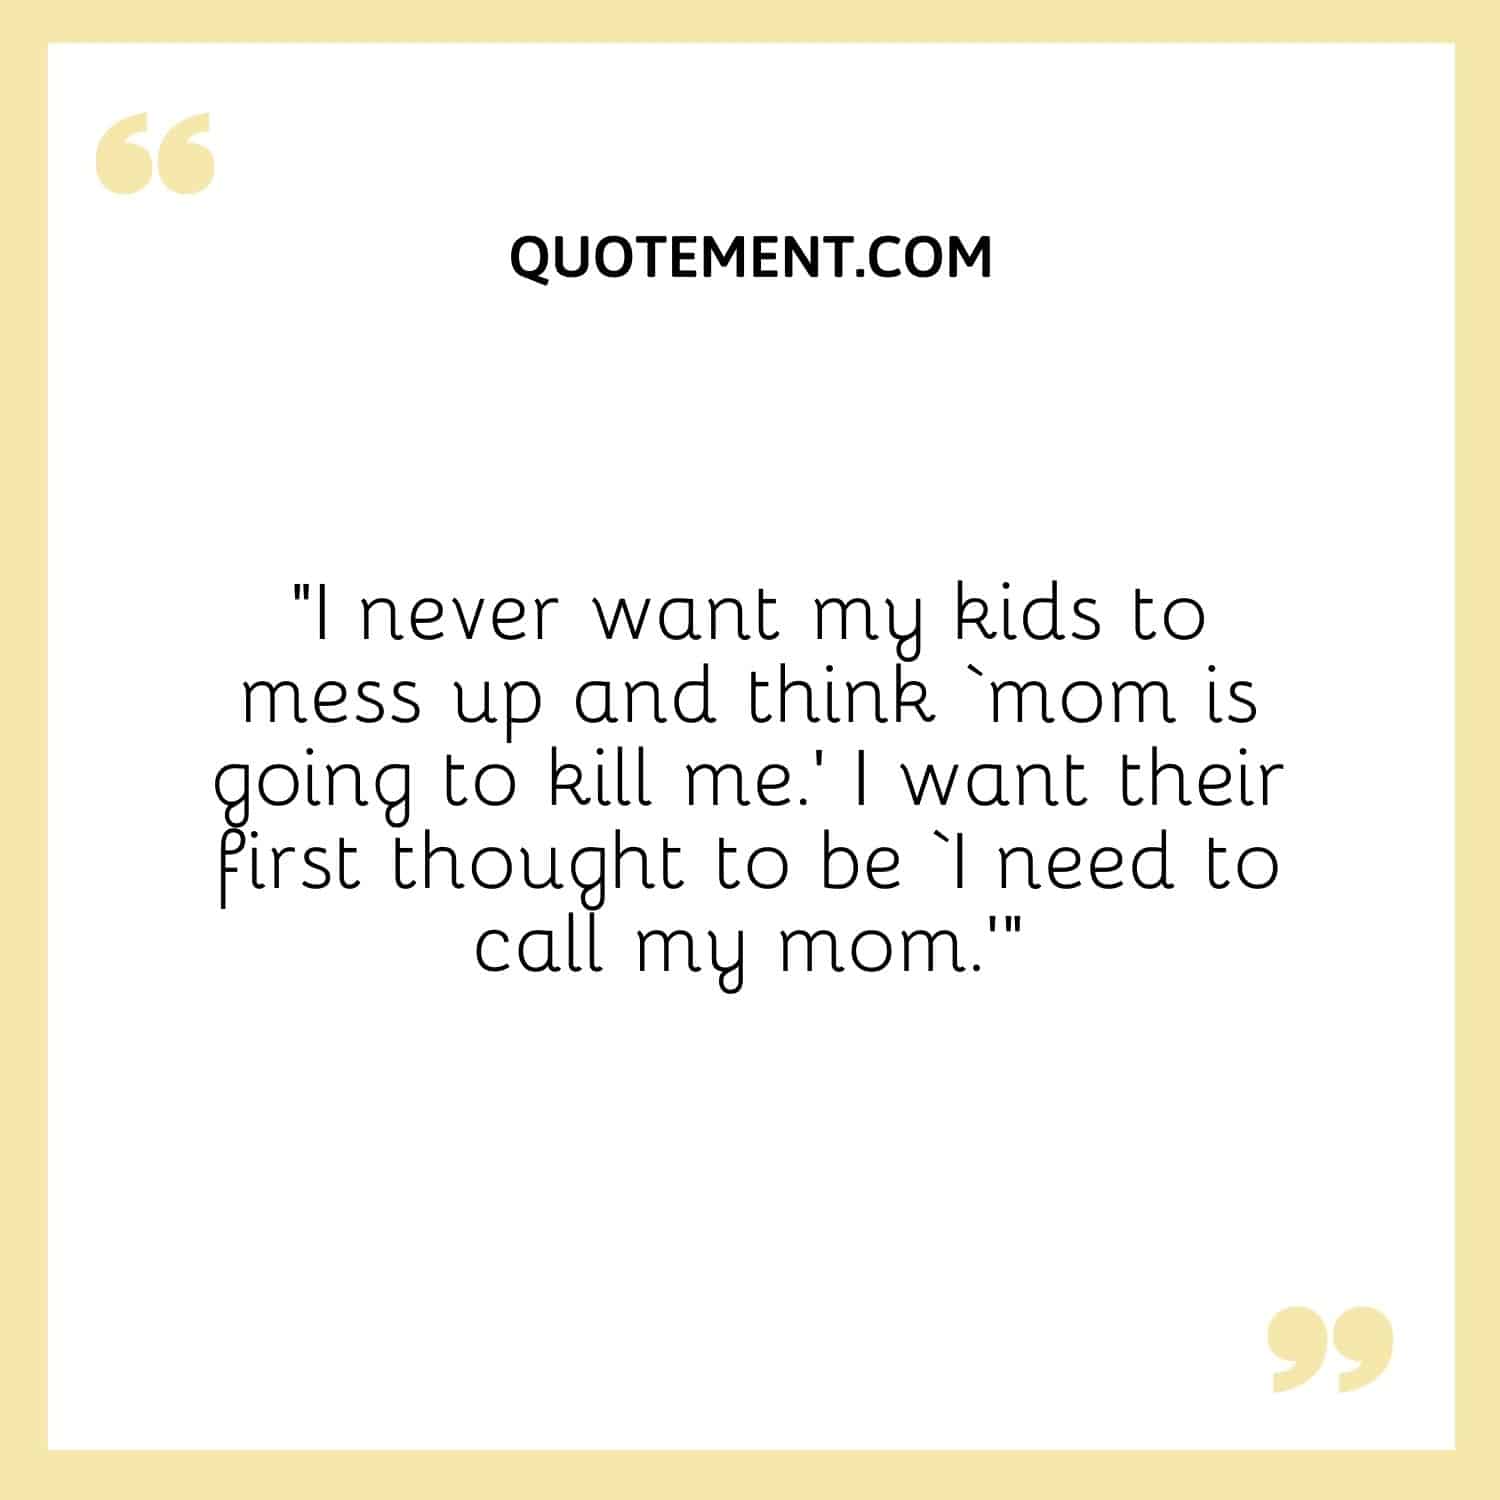 I never want my kids to mess up and think ‘mom is going to kill me.’ I want their first thought to be ‘I need to call my mom